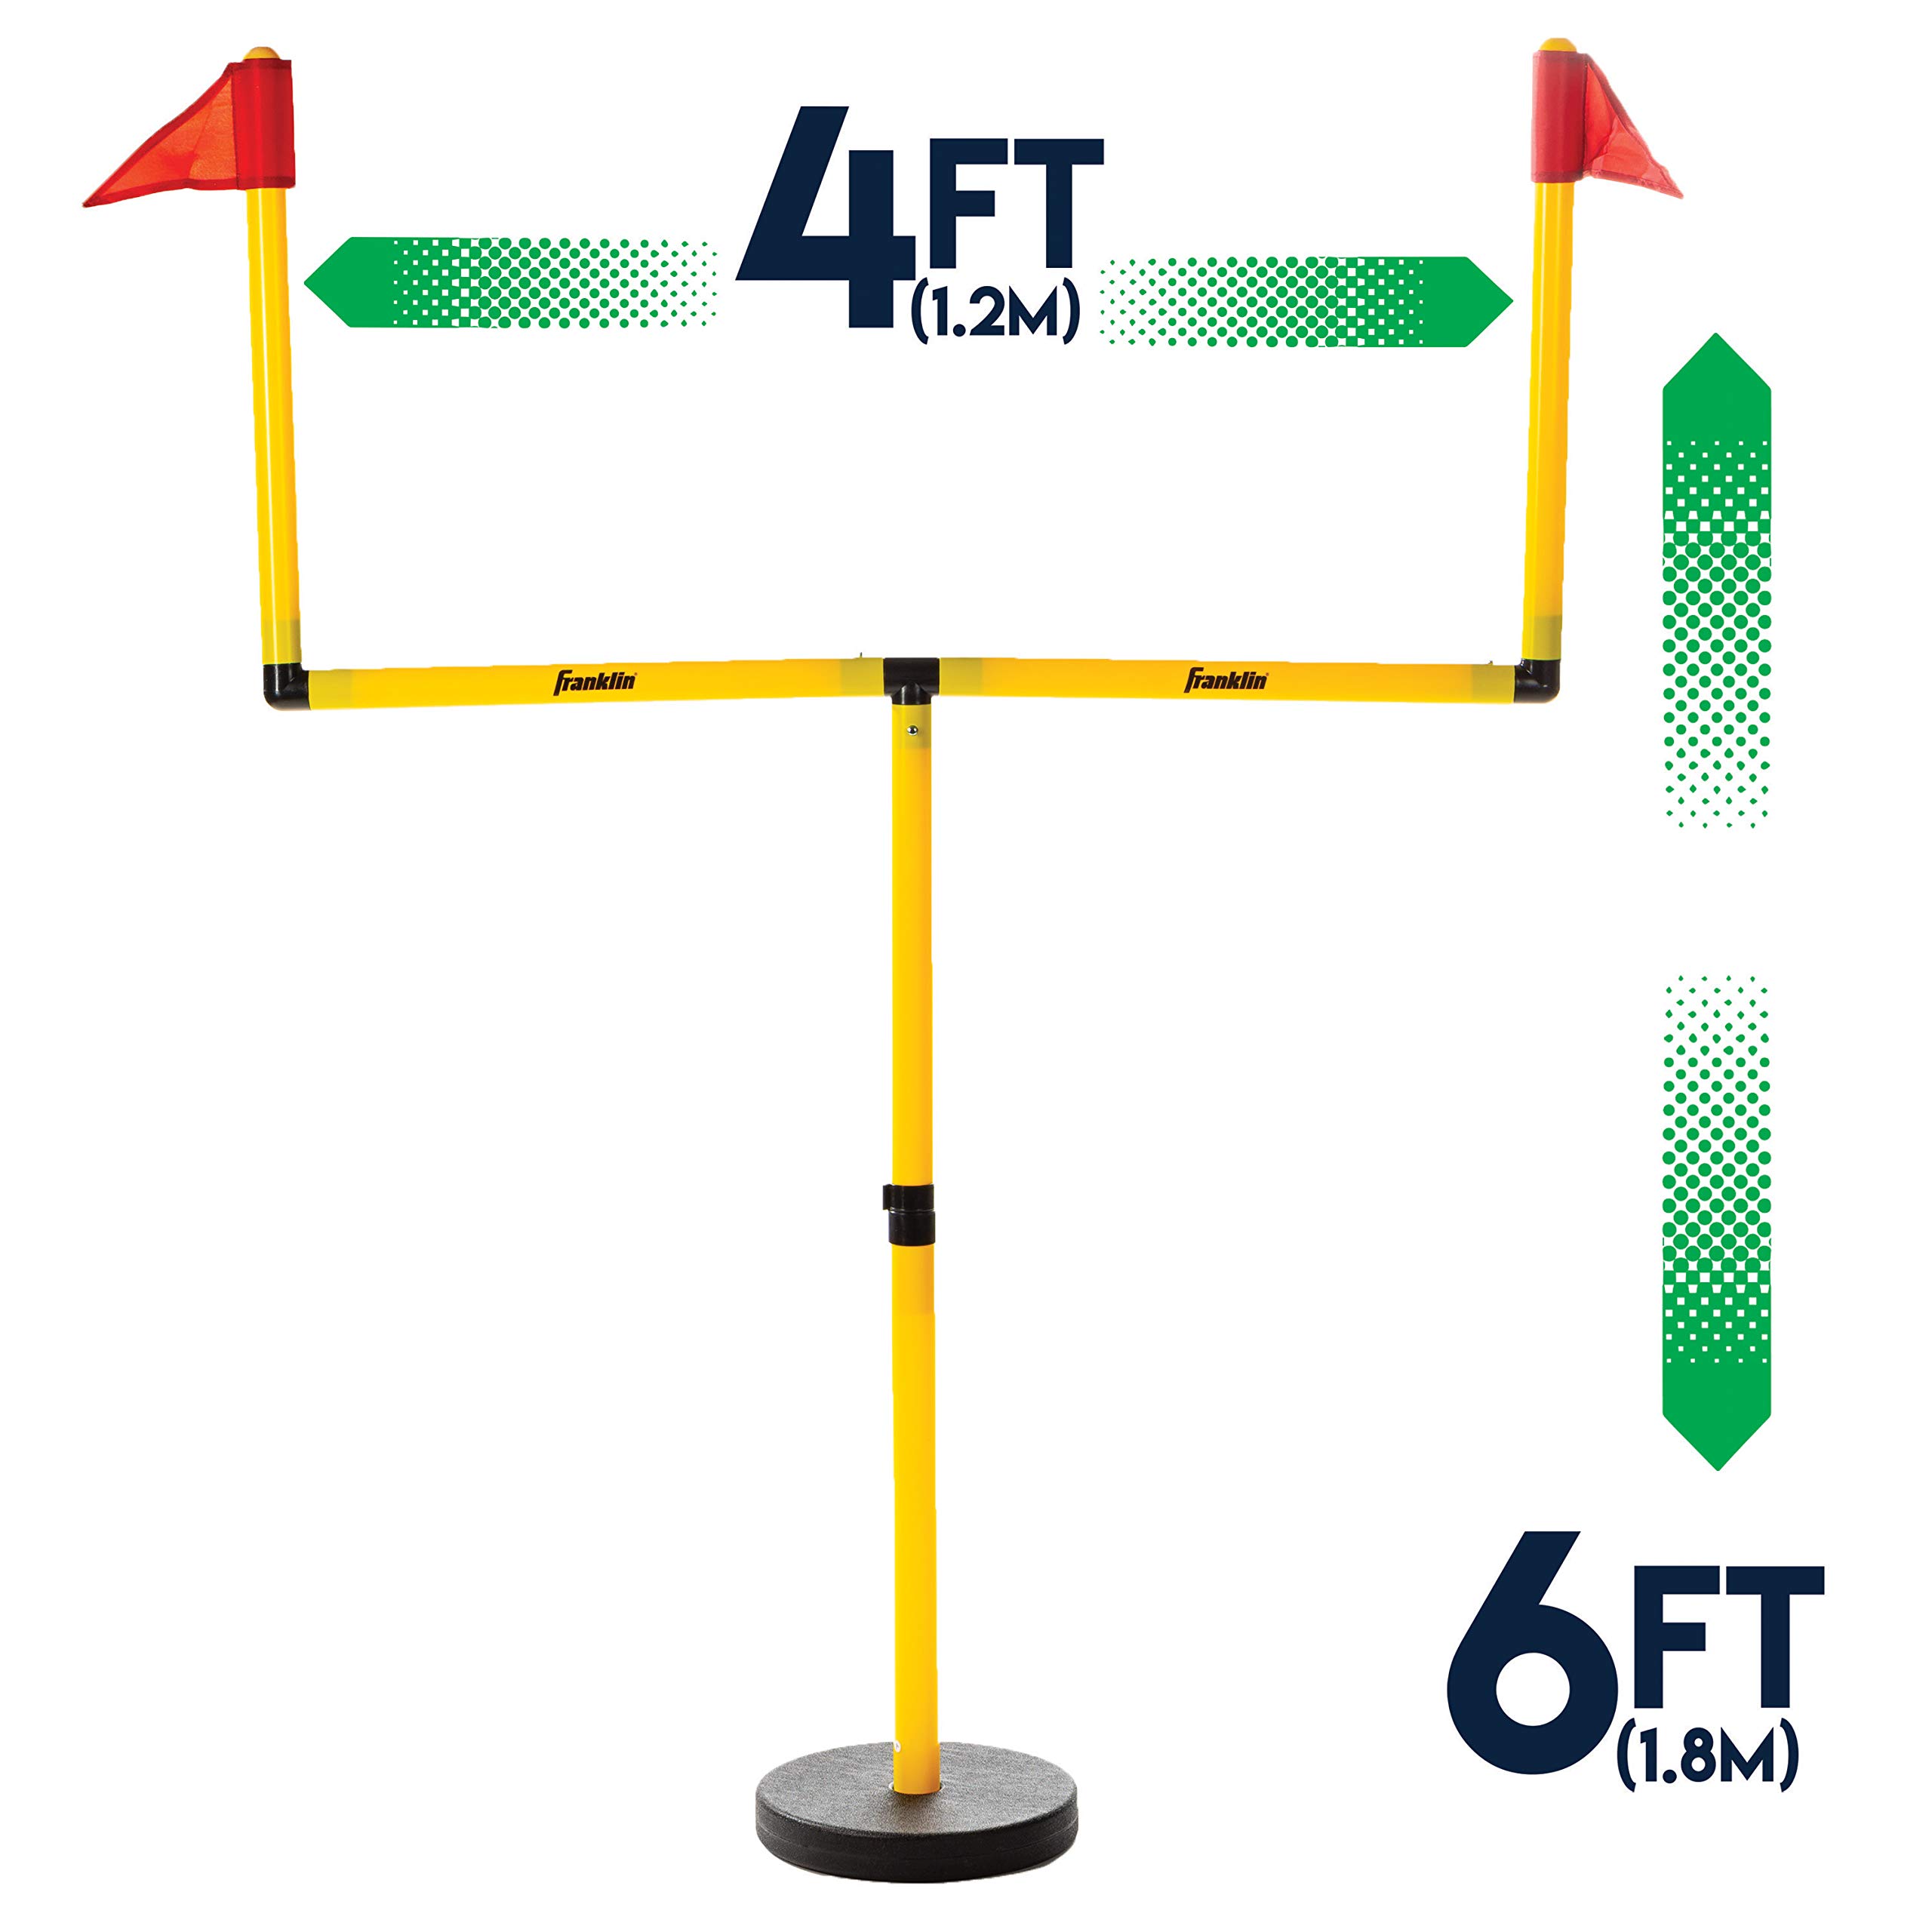 Franklin Sports Youth Football Goal Post Set - Kids Football Easily Adjustable Field Goals - Includes 2 Goal Posts - Perfect for Ages 4+ Backyard Play